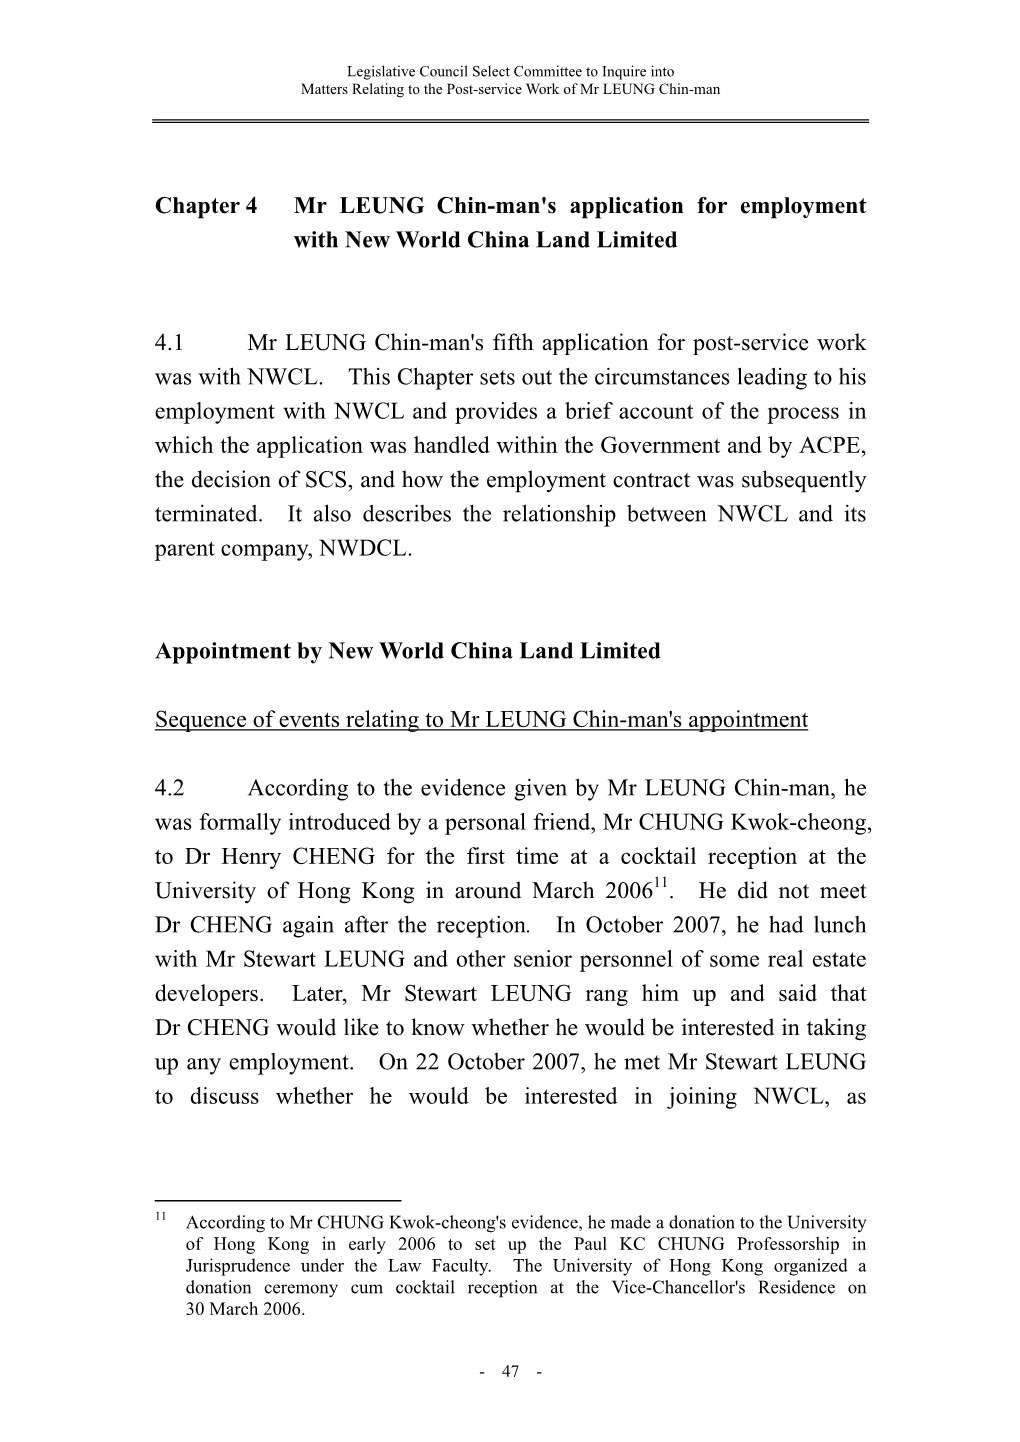 Mr LEUNG Chin-Man's Application for Employment with New World China Land Limited